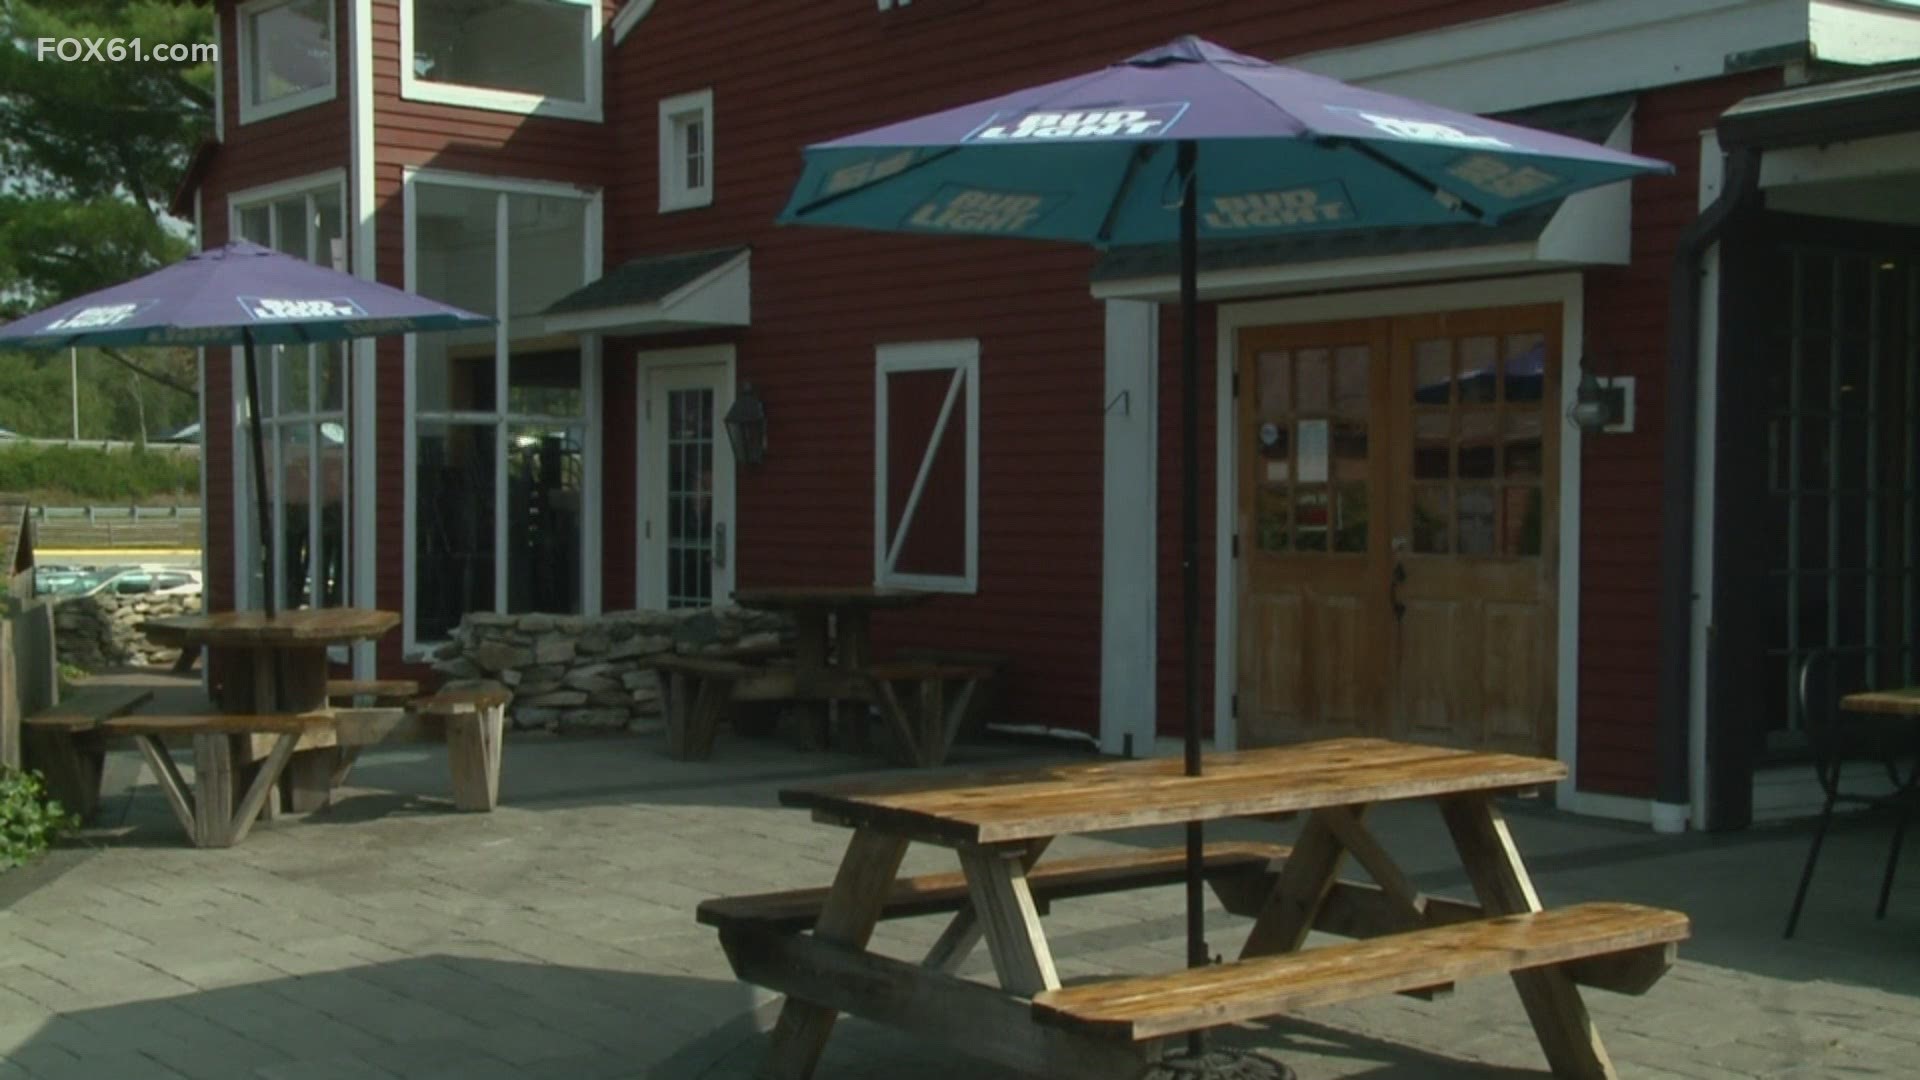 Restaurants with outdoor dining are beginning to come up with a plan to still keep that an option for customers.